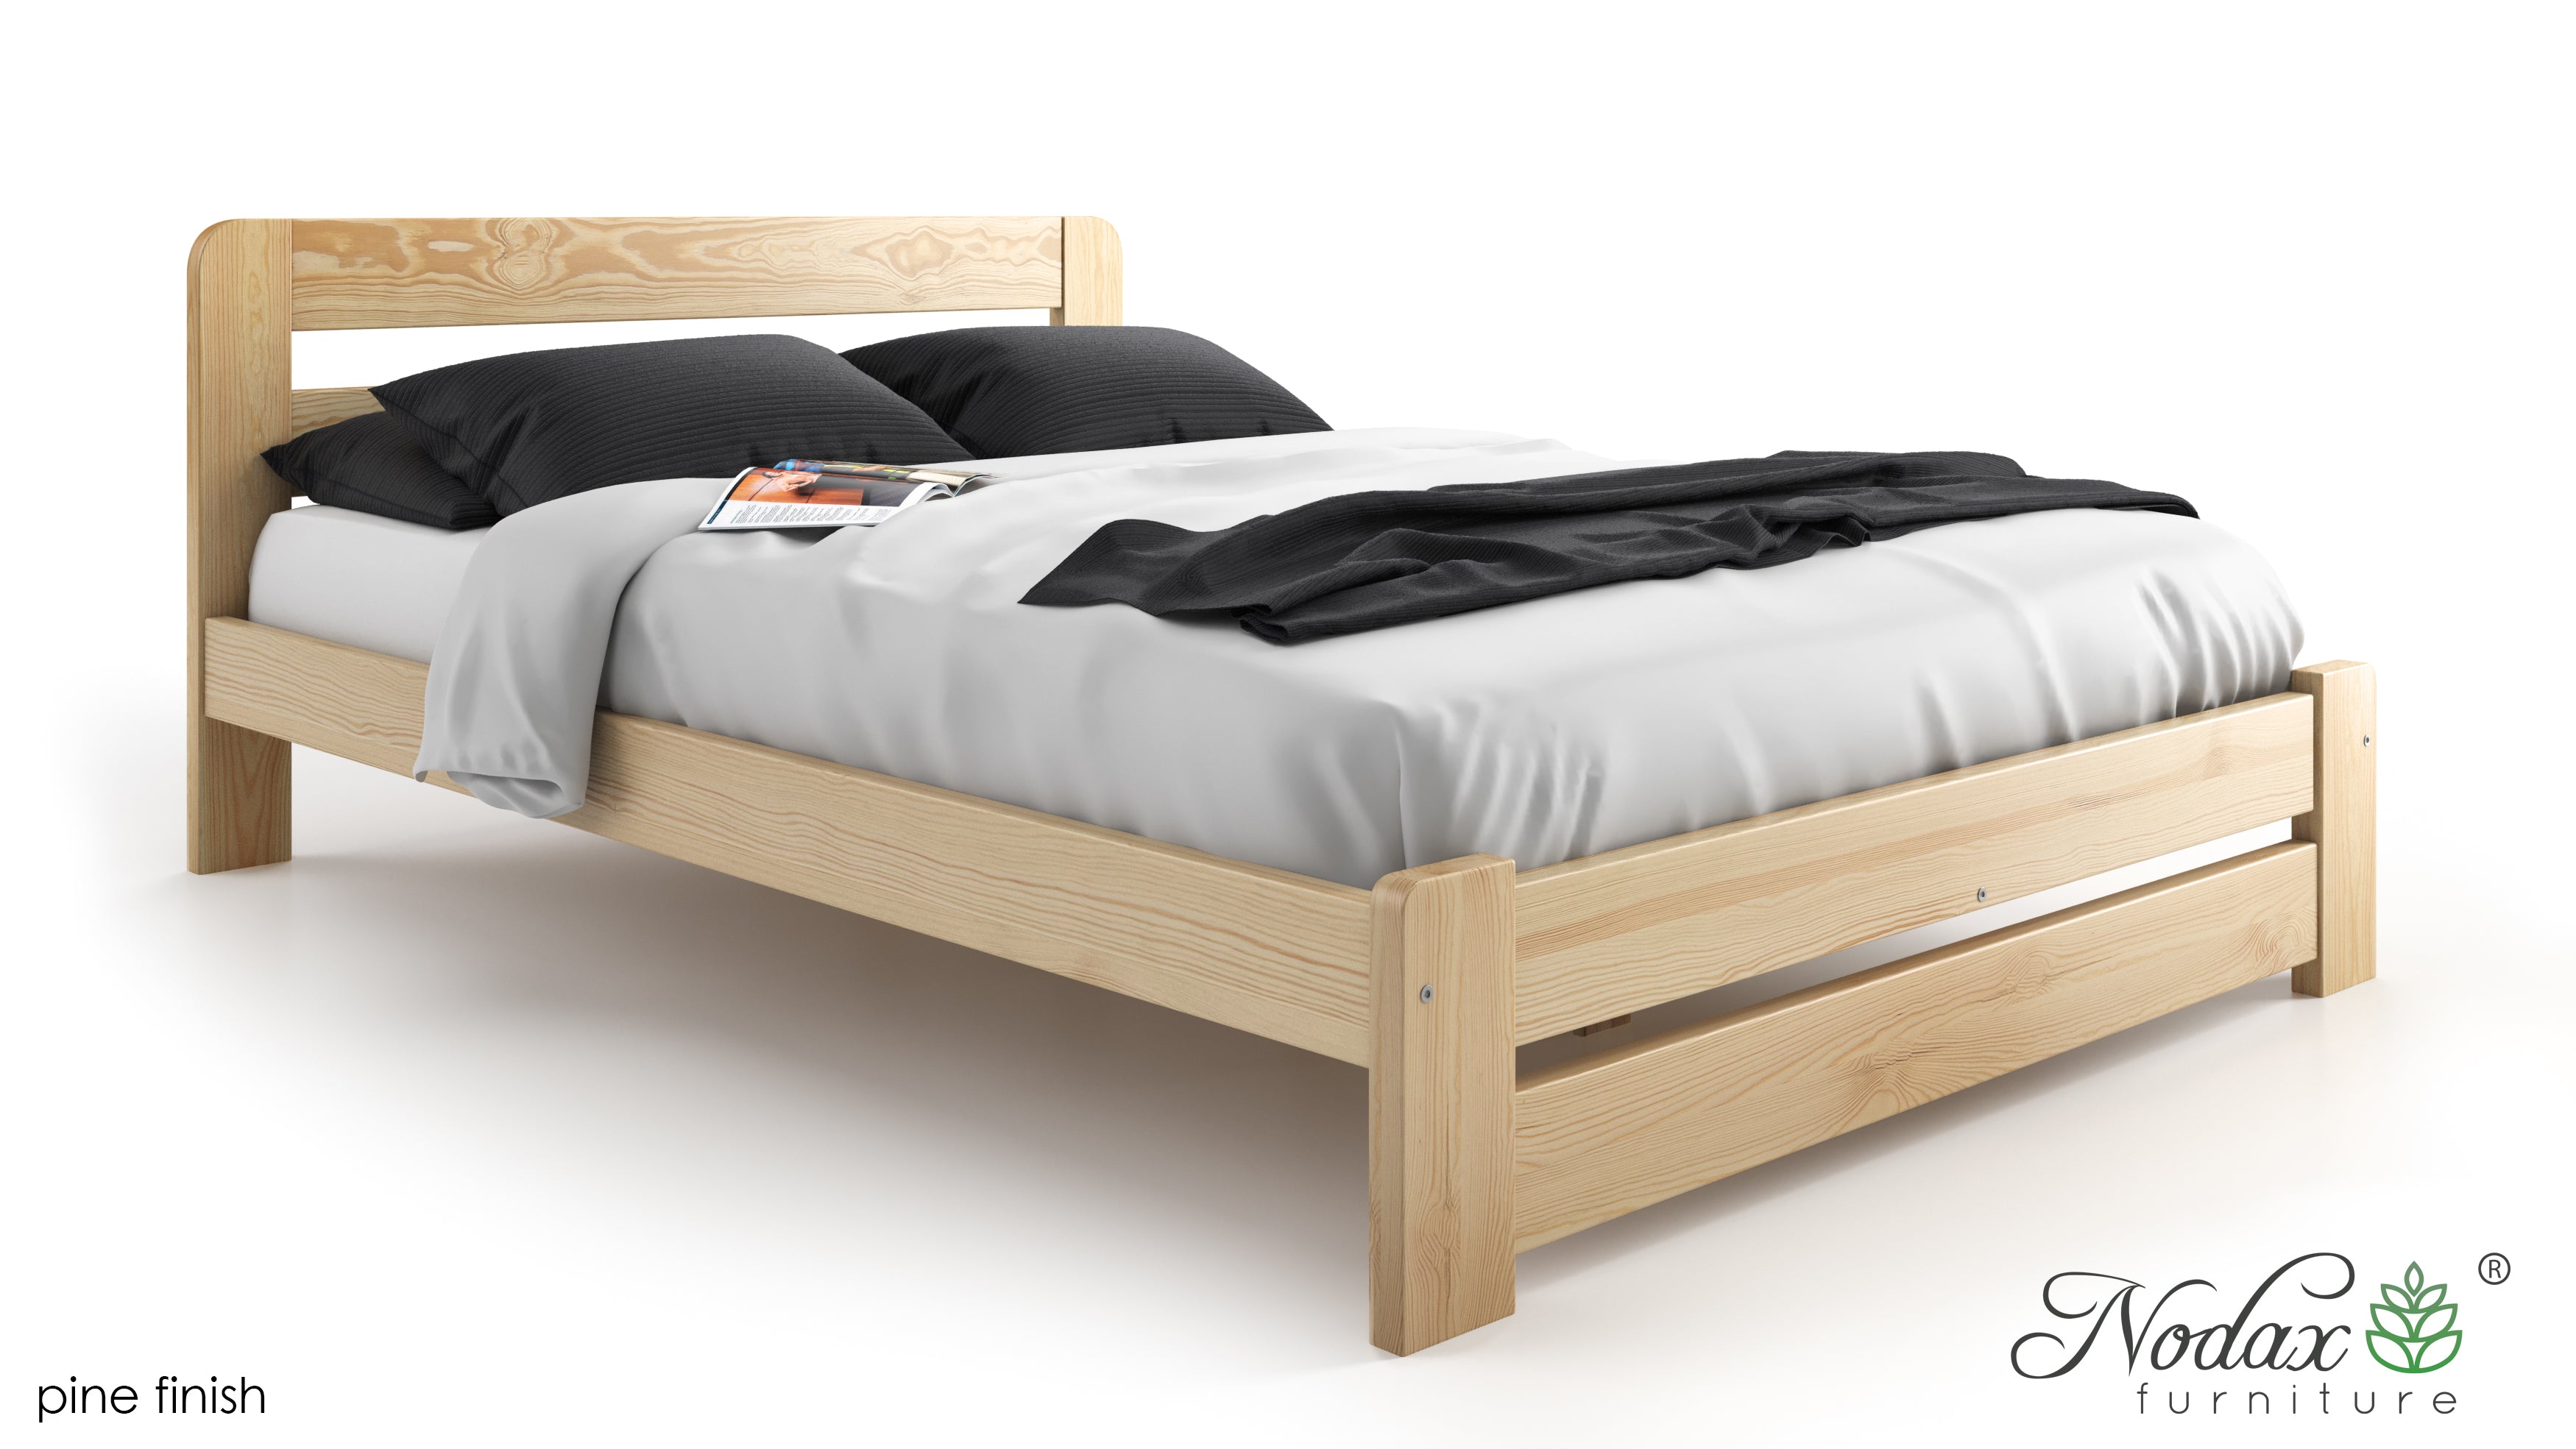 Wooden-bed-frame-Aurora-beds-online-double-size